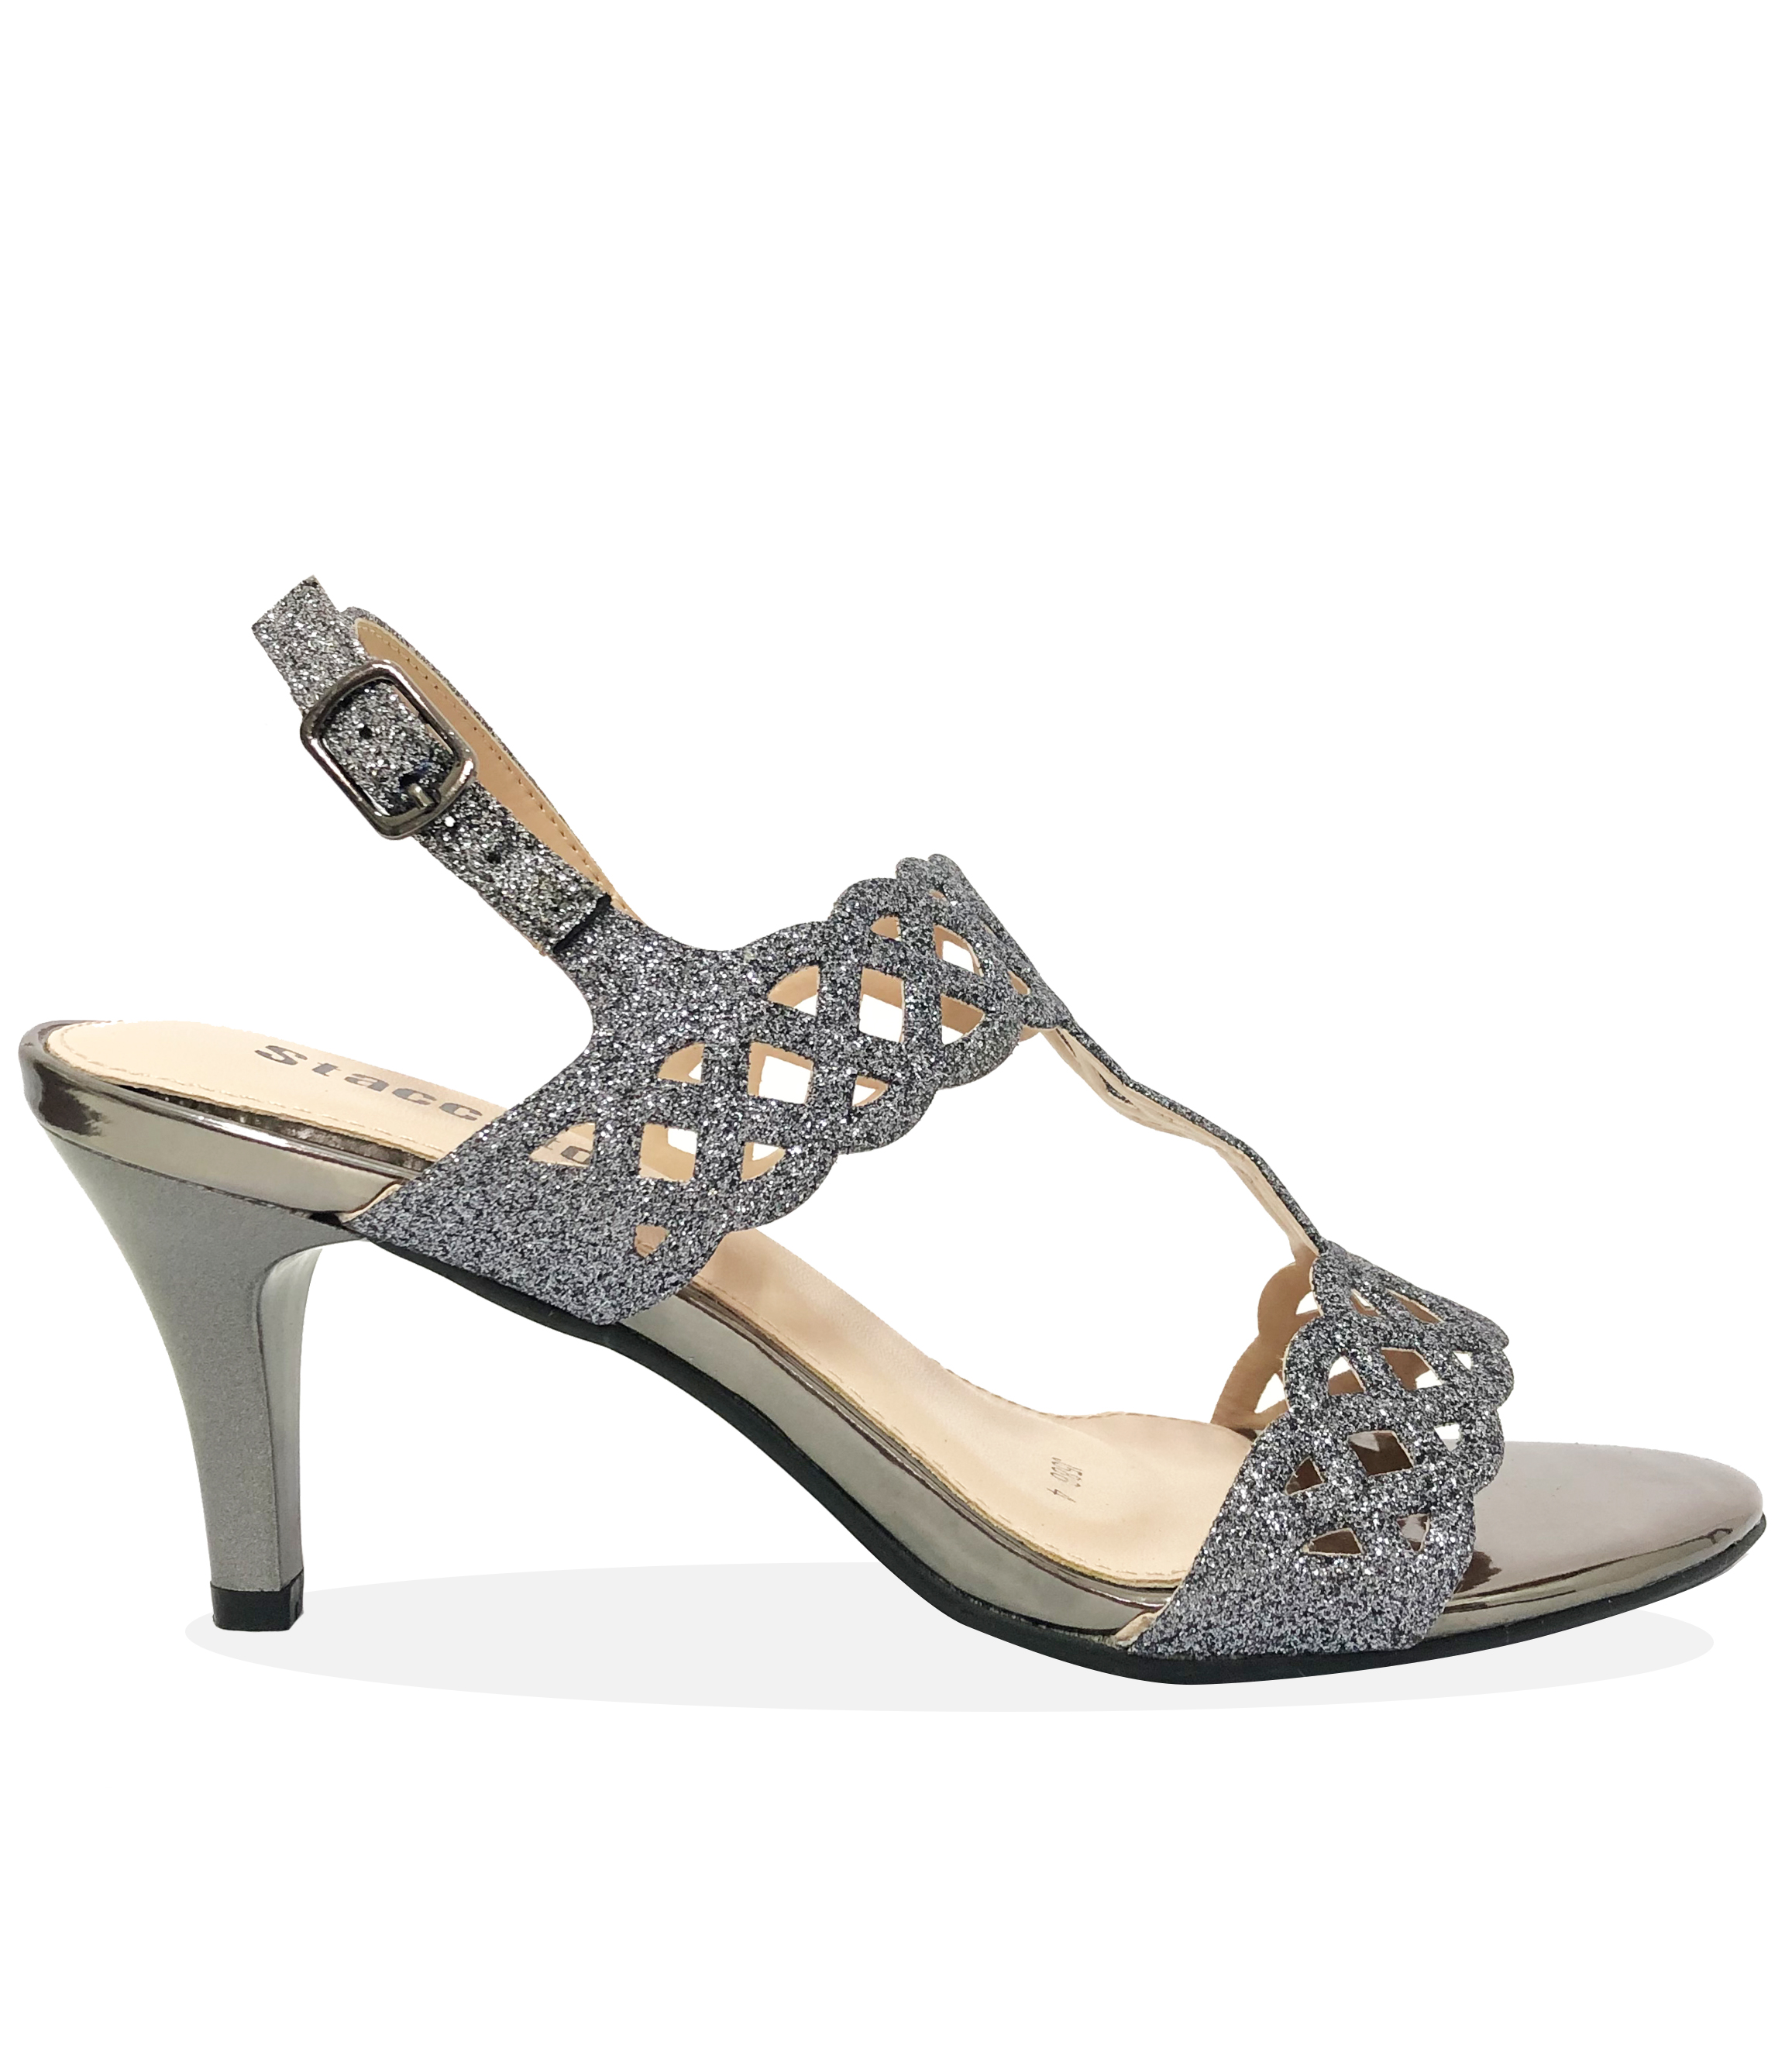 STACCATO PEWTER GLITTER SANDAL HEEL | Rosella - Style inspired by elegance